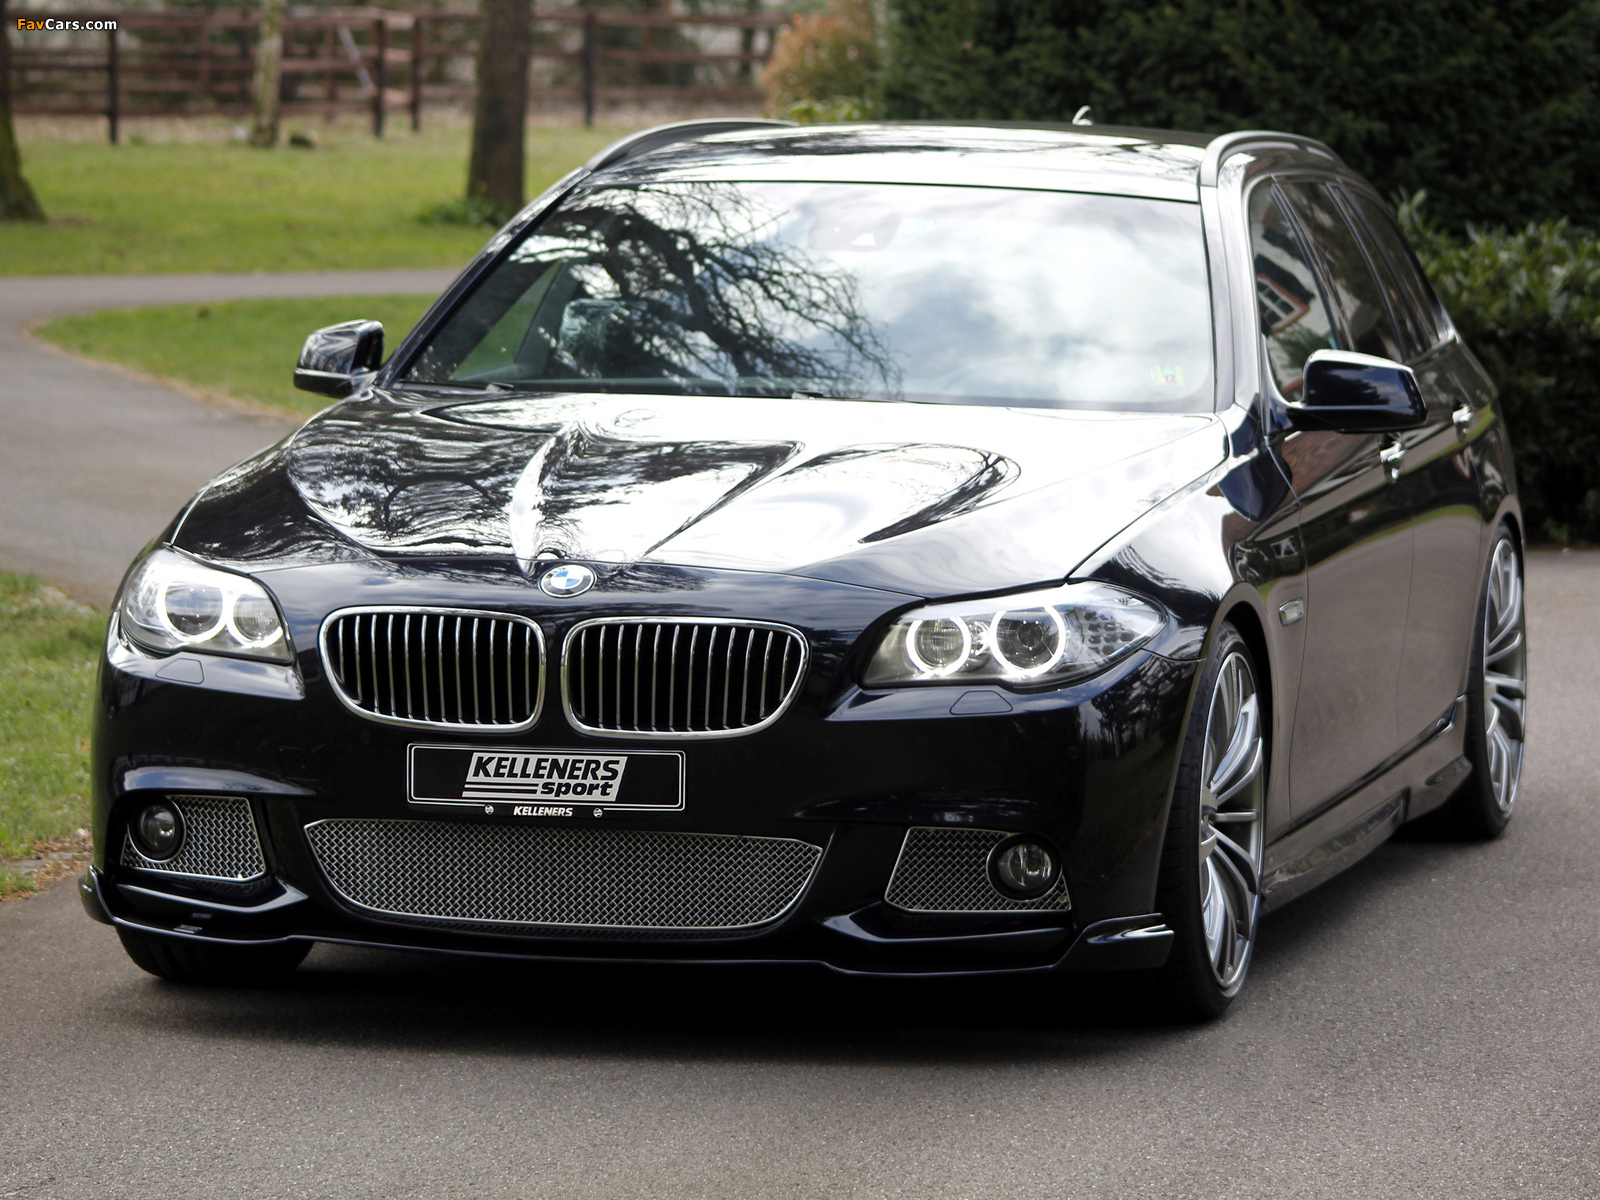 Kelleners Sport BMW 5 Series Touring (F11) 2012 images (1600 x 1200)